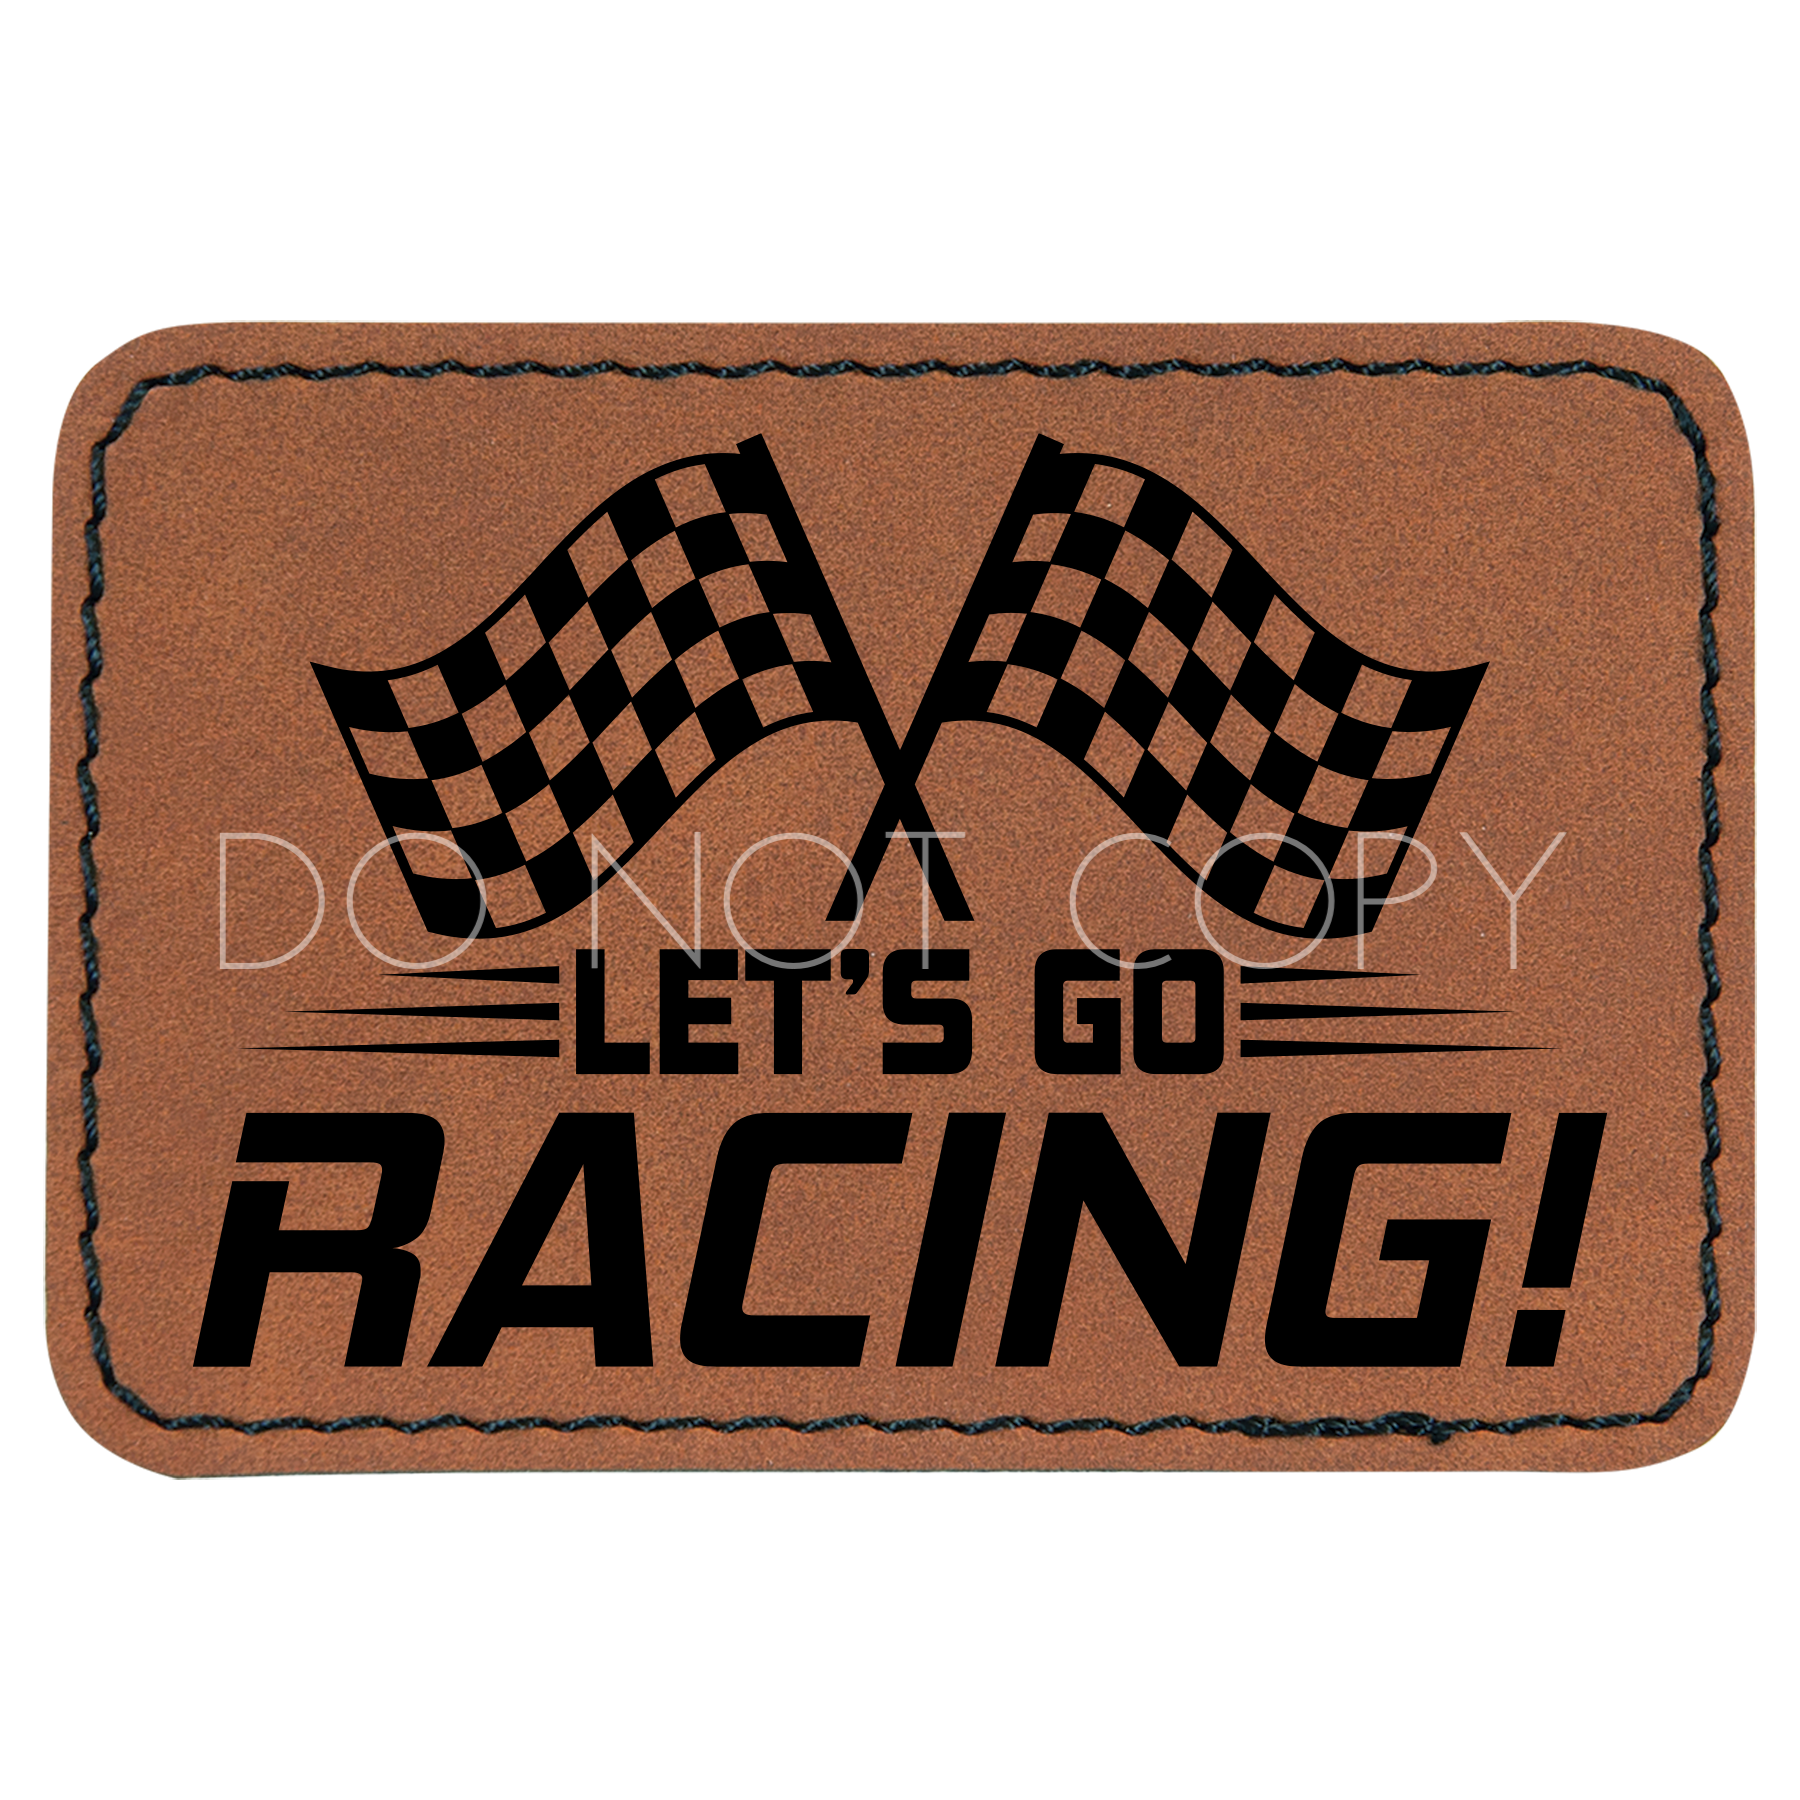 Let's Go Racing Patch